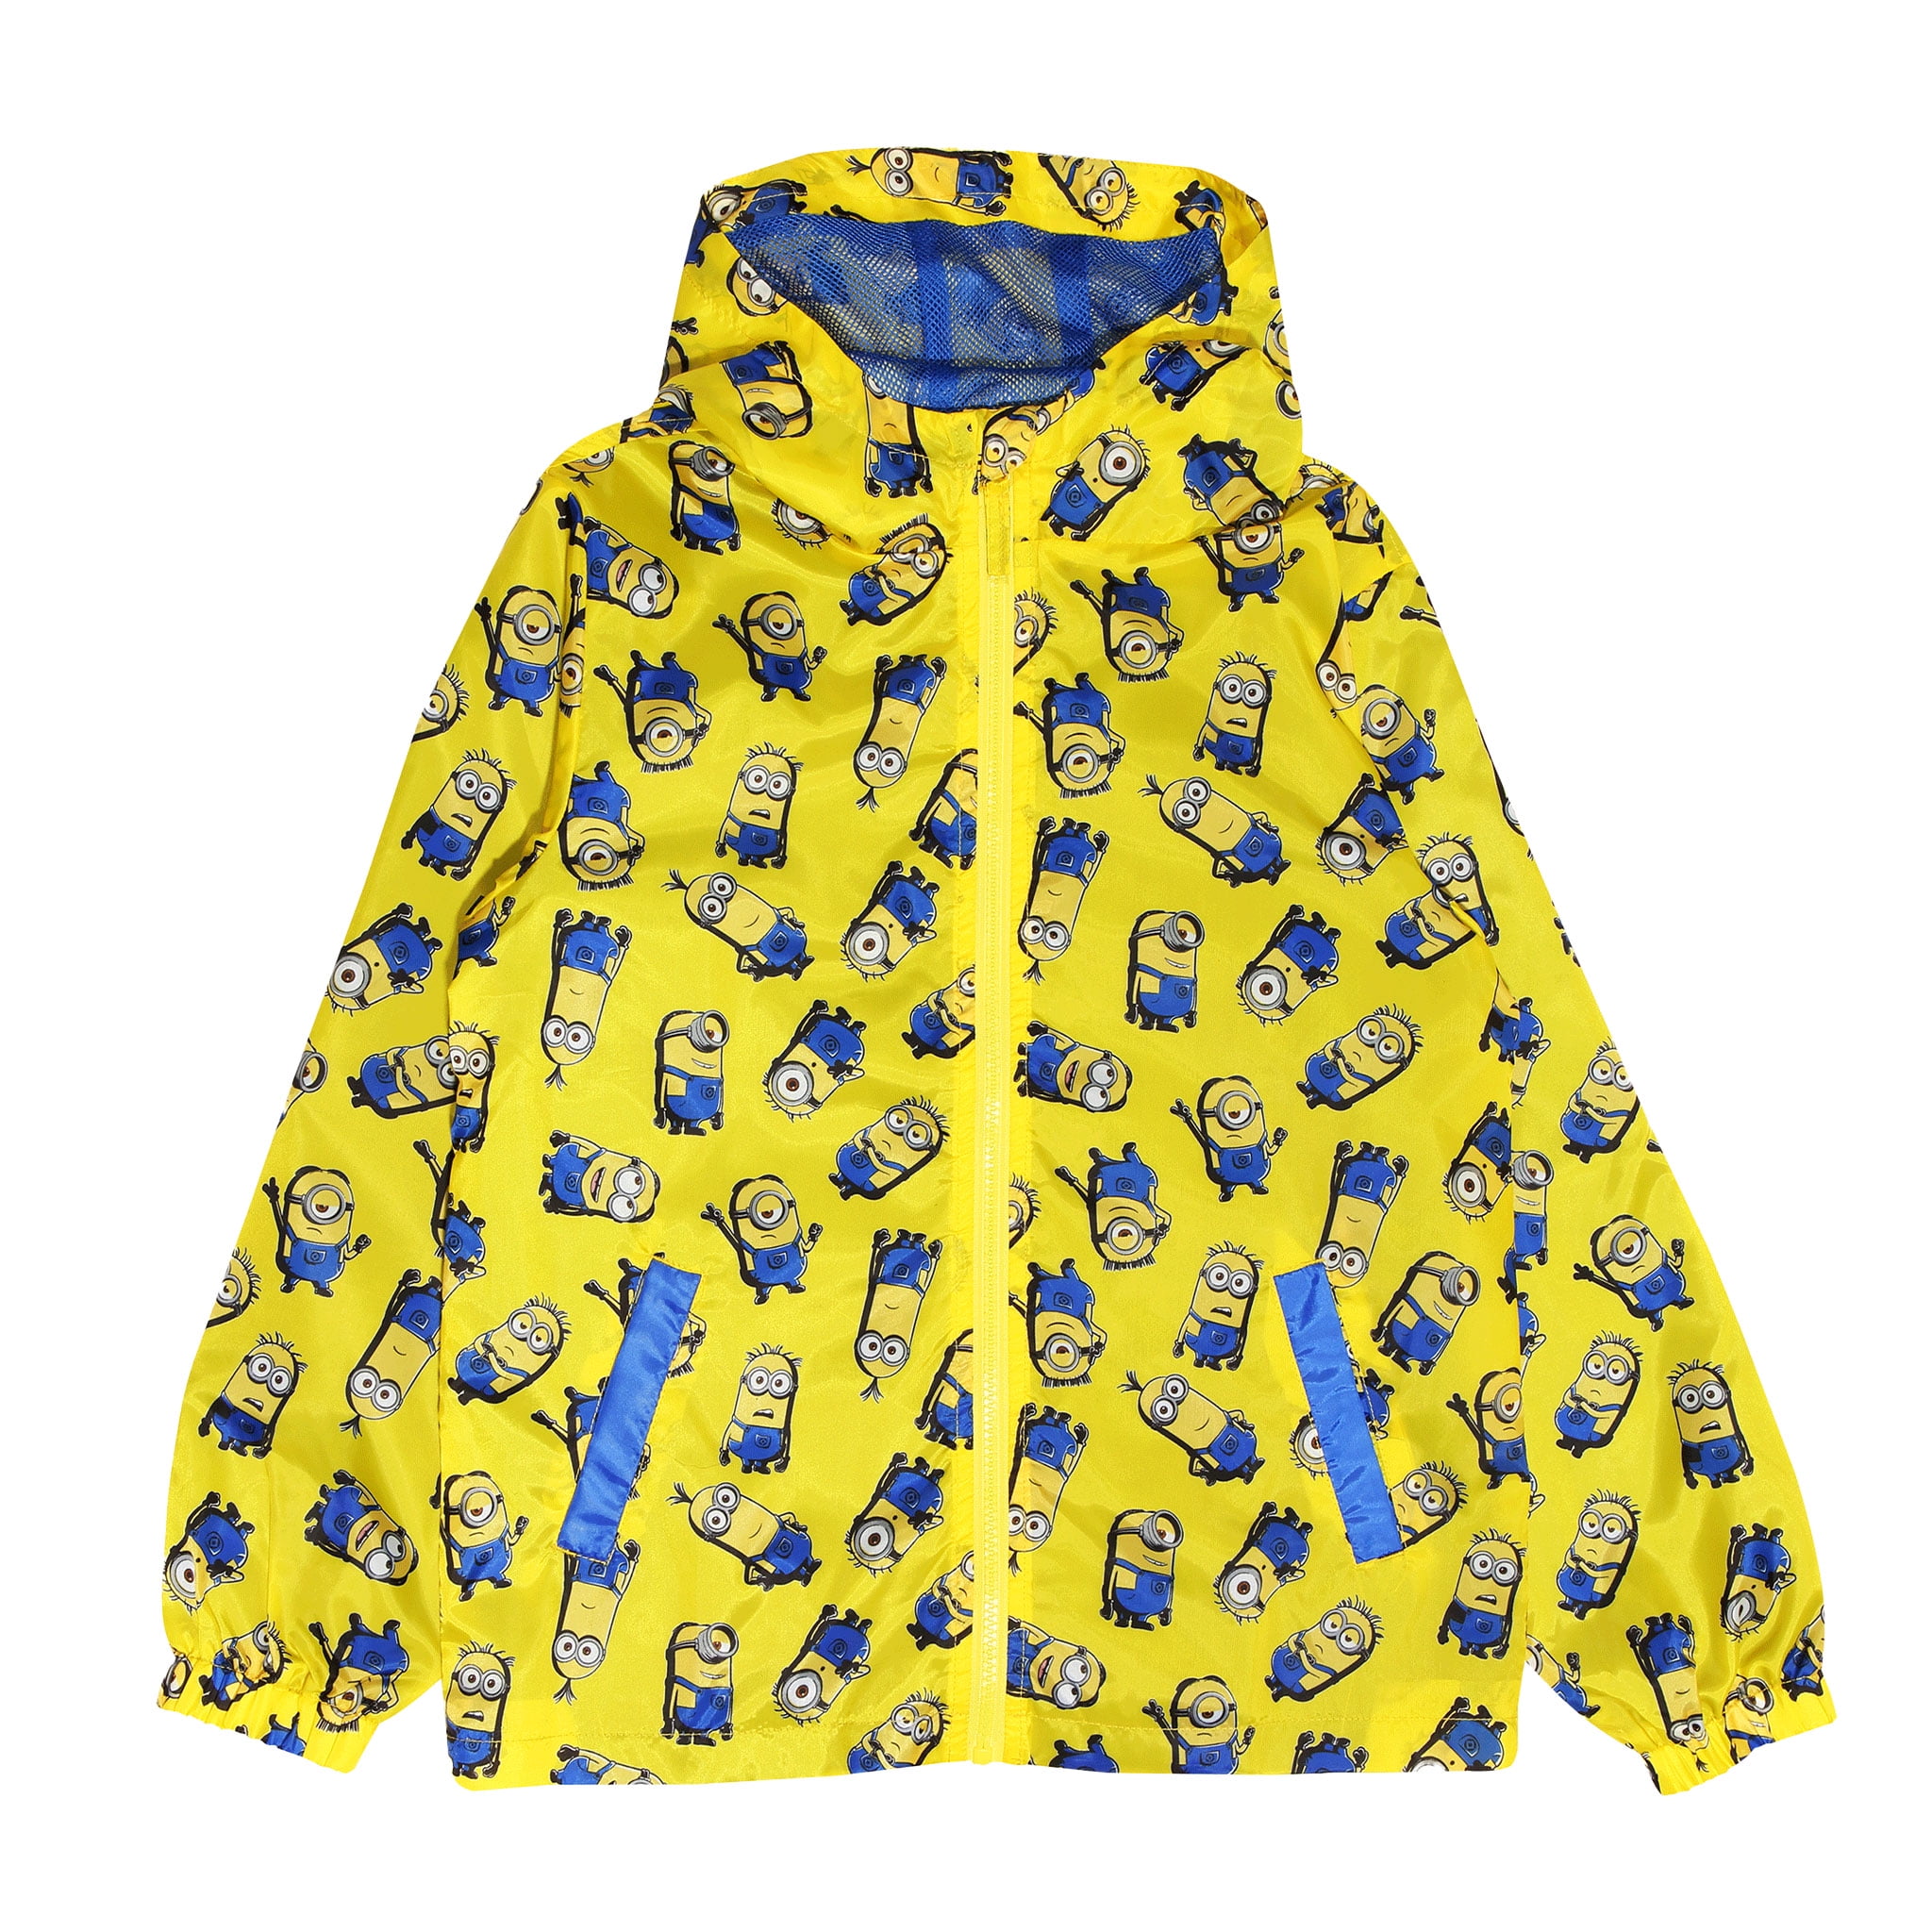 Girls Tracksuit Despicable Me Unique Minions Zip Hooded Jogging Suit 3-8 Years 